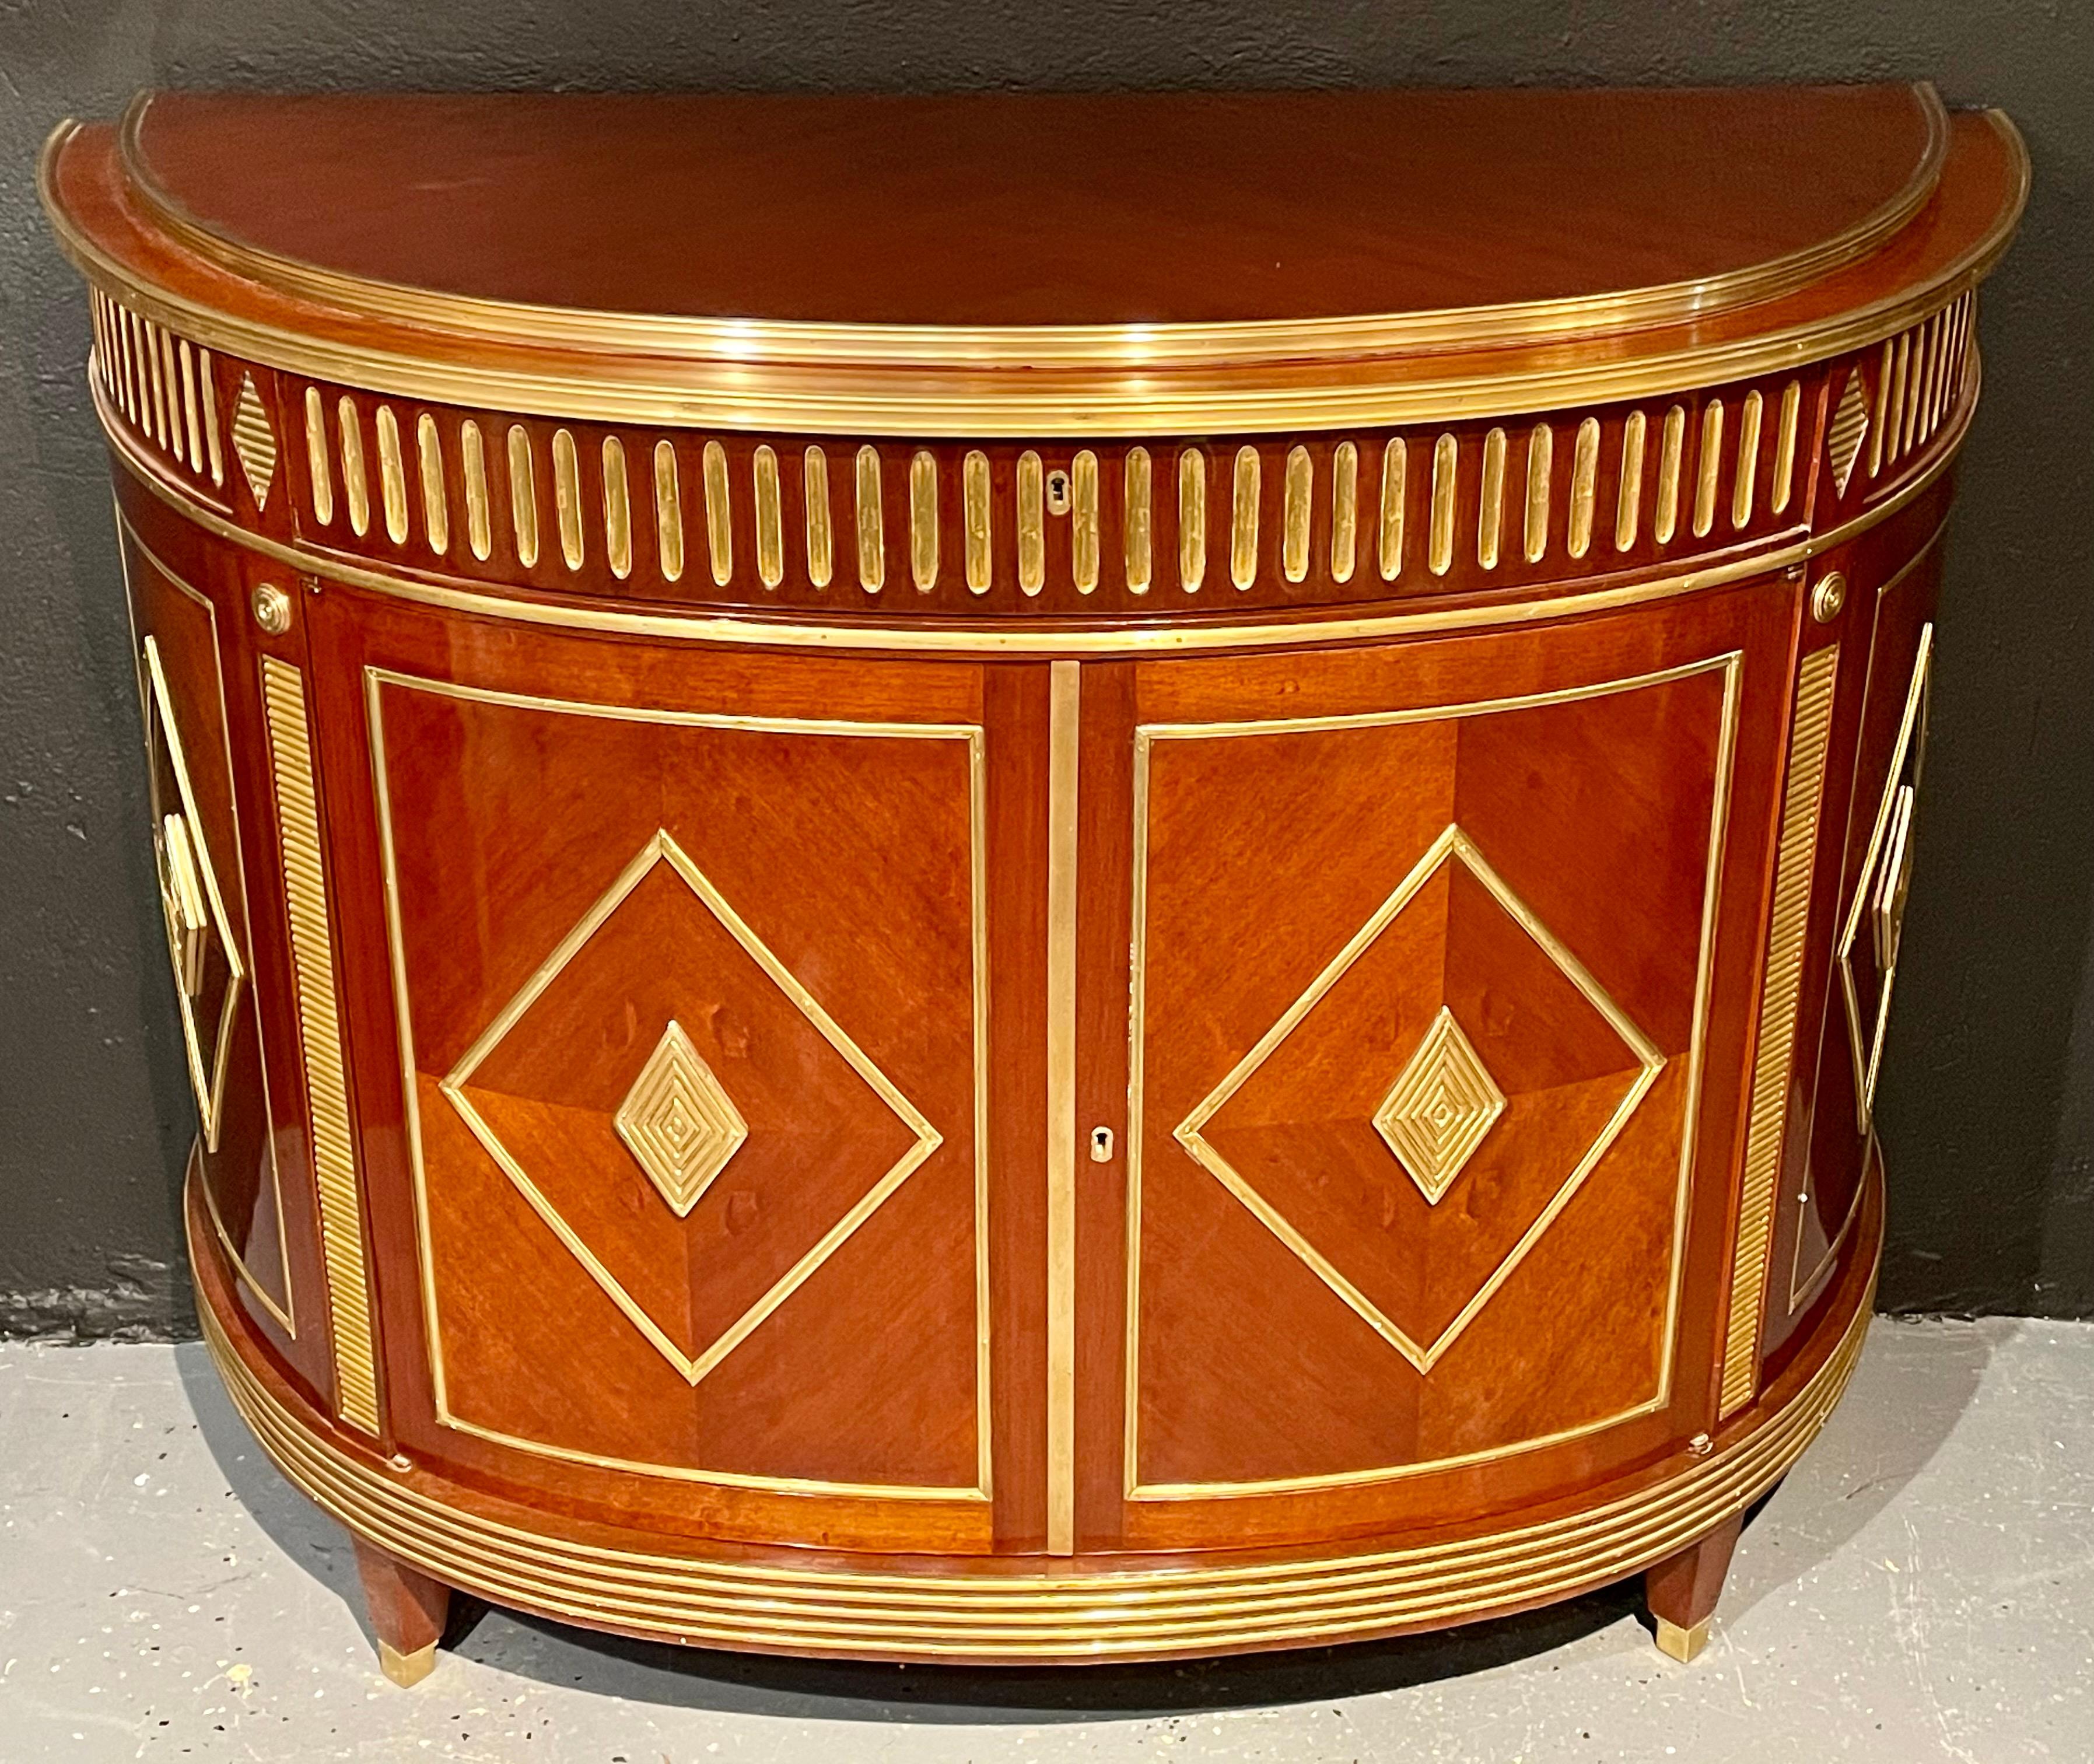 20th Century Pair of Mahogany Demilune Servers, Commodes Nightstands, Russian Neoclassical